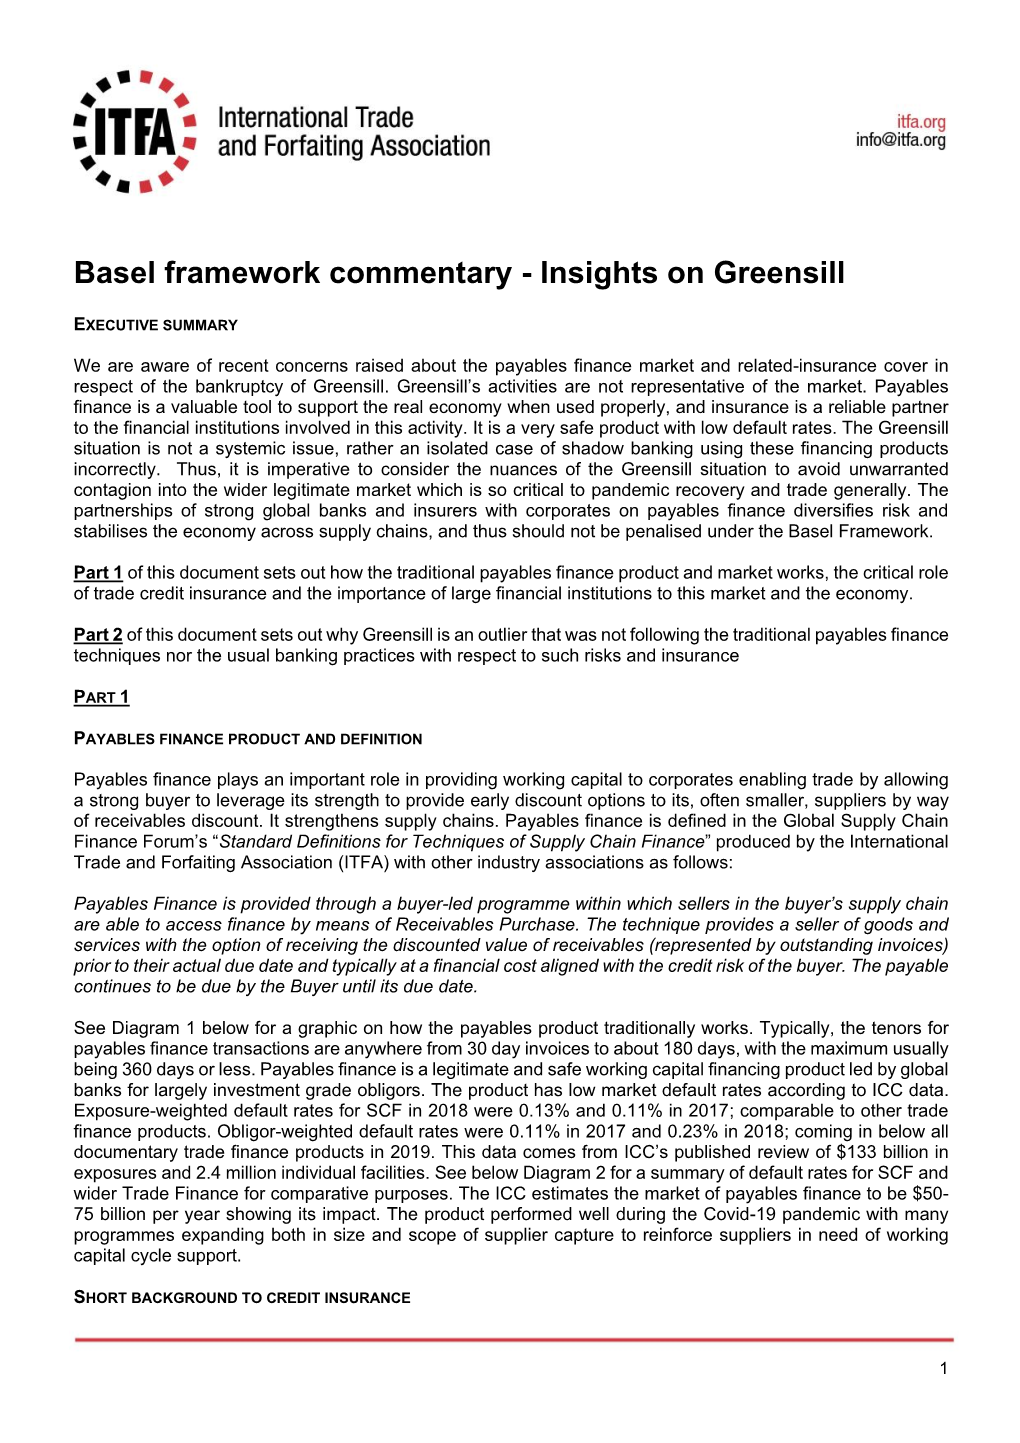 Basel Framework Commentary - Insights on Greensill